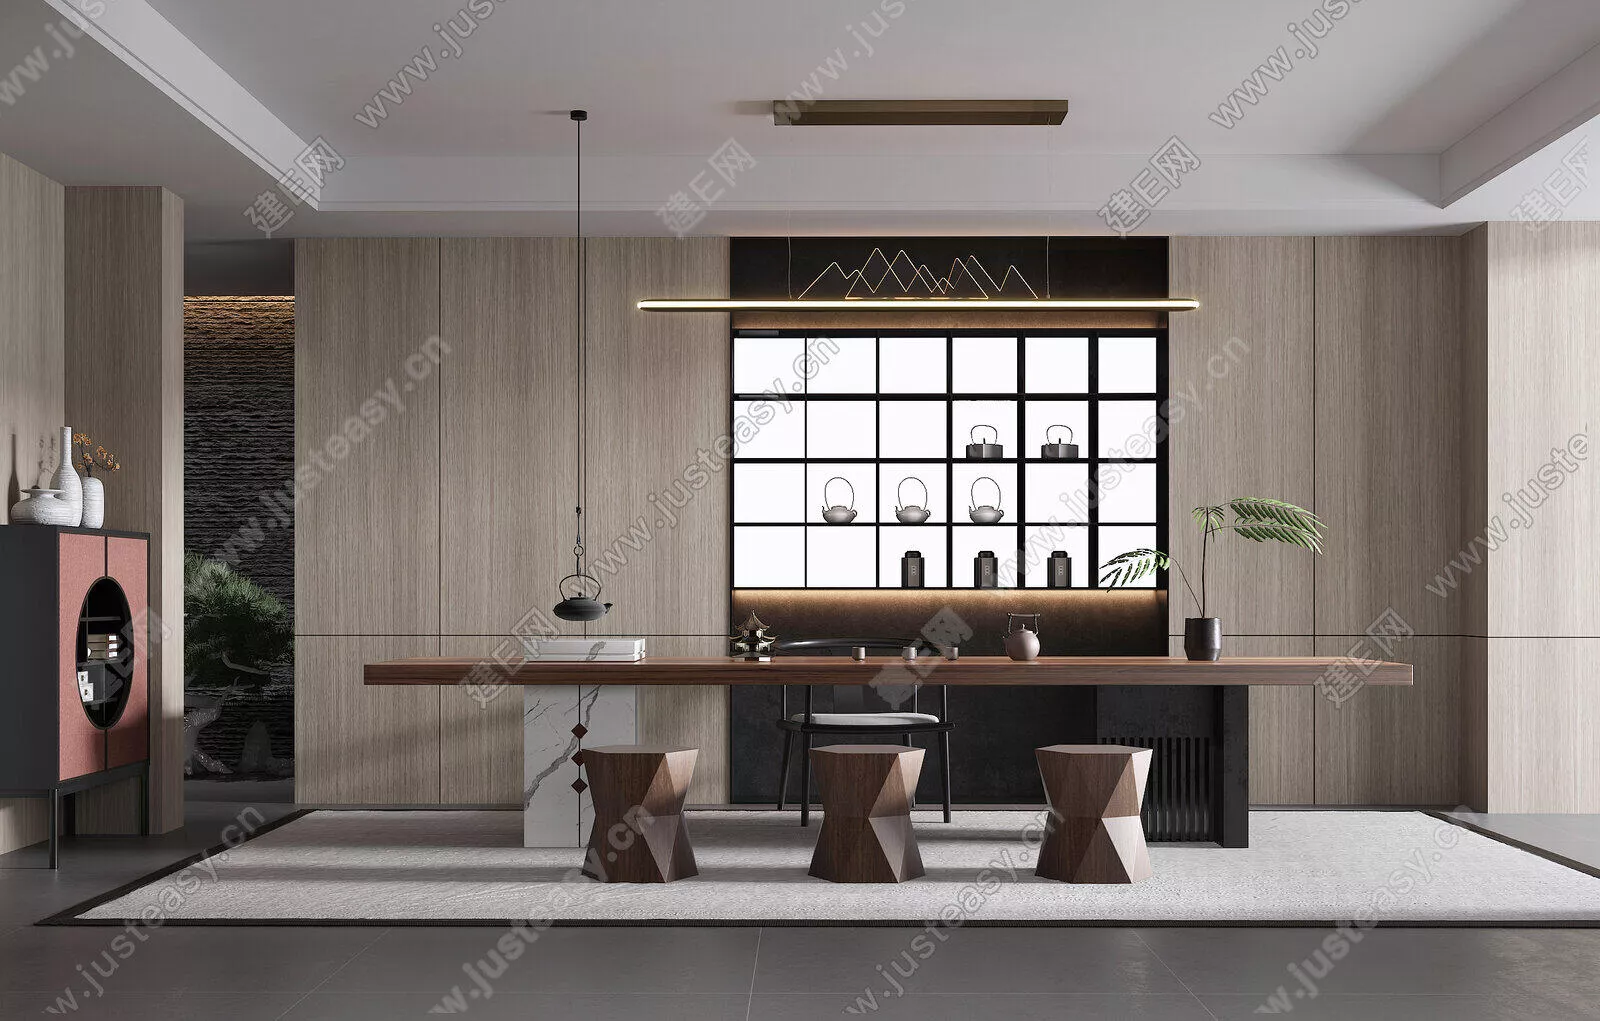 CHINESE TEAROOM - SKETCHUP 3D SCENE - ENSCAPE - 105991668